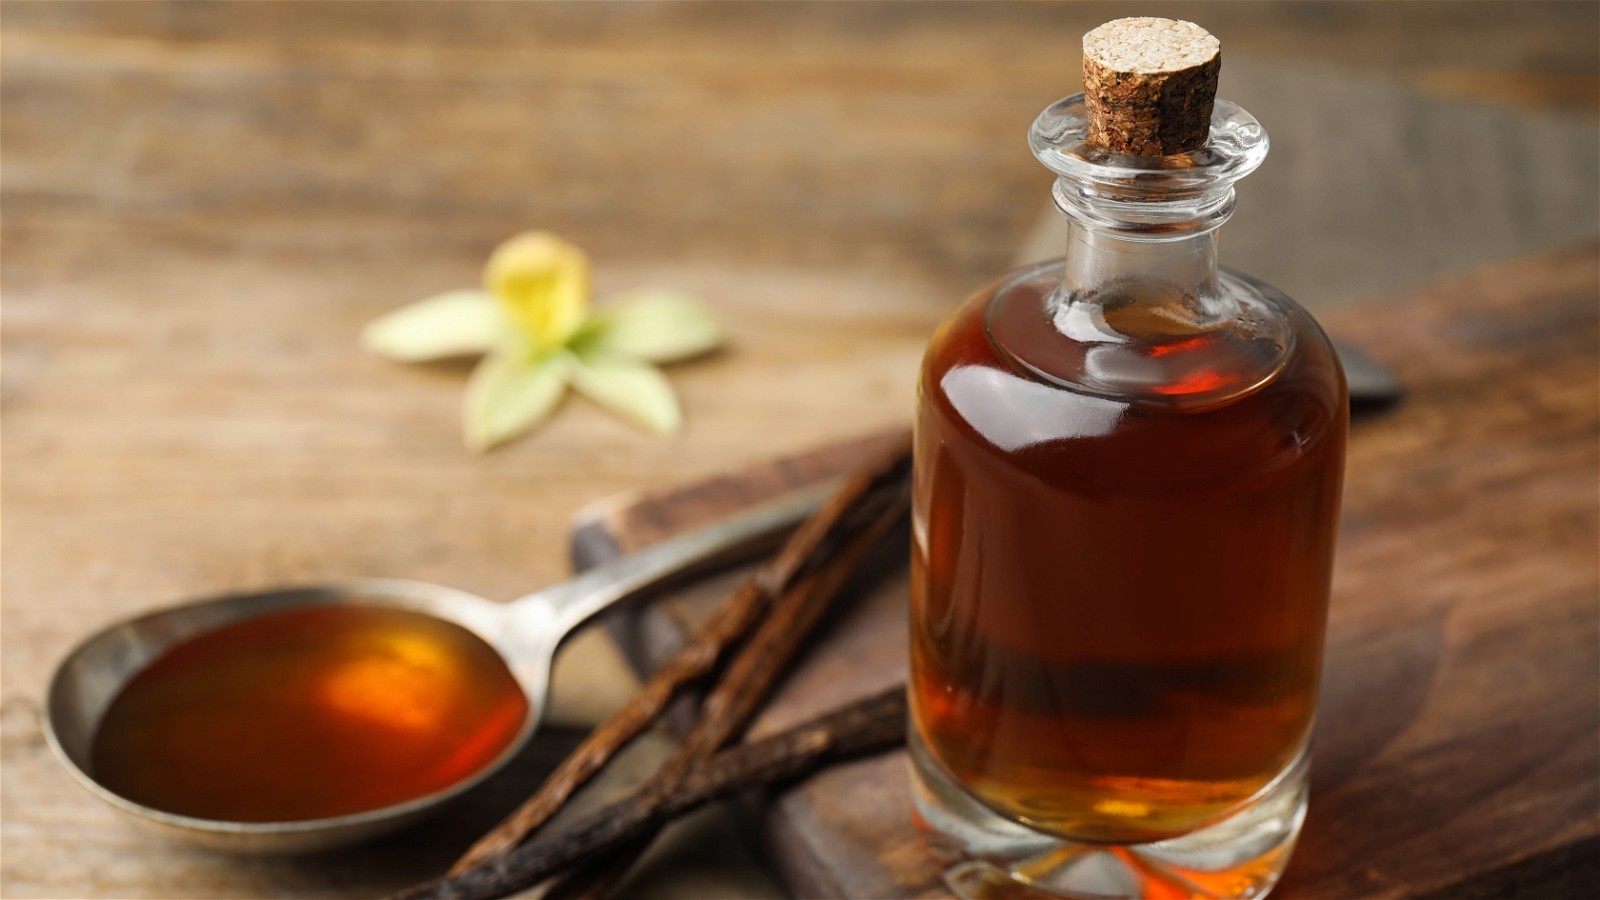 Image of Make Your Own Homemade Vanilla Extract